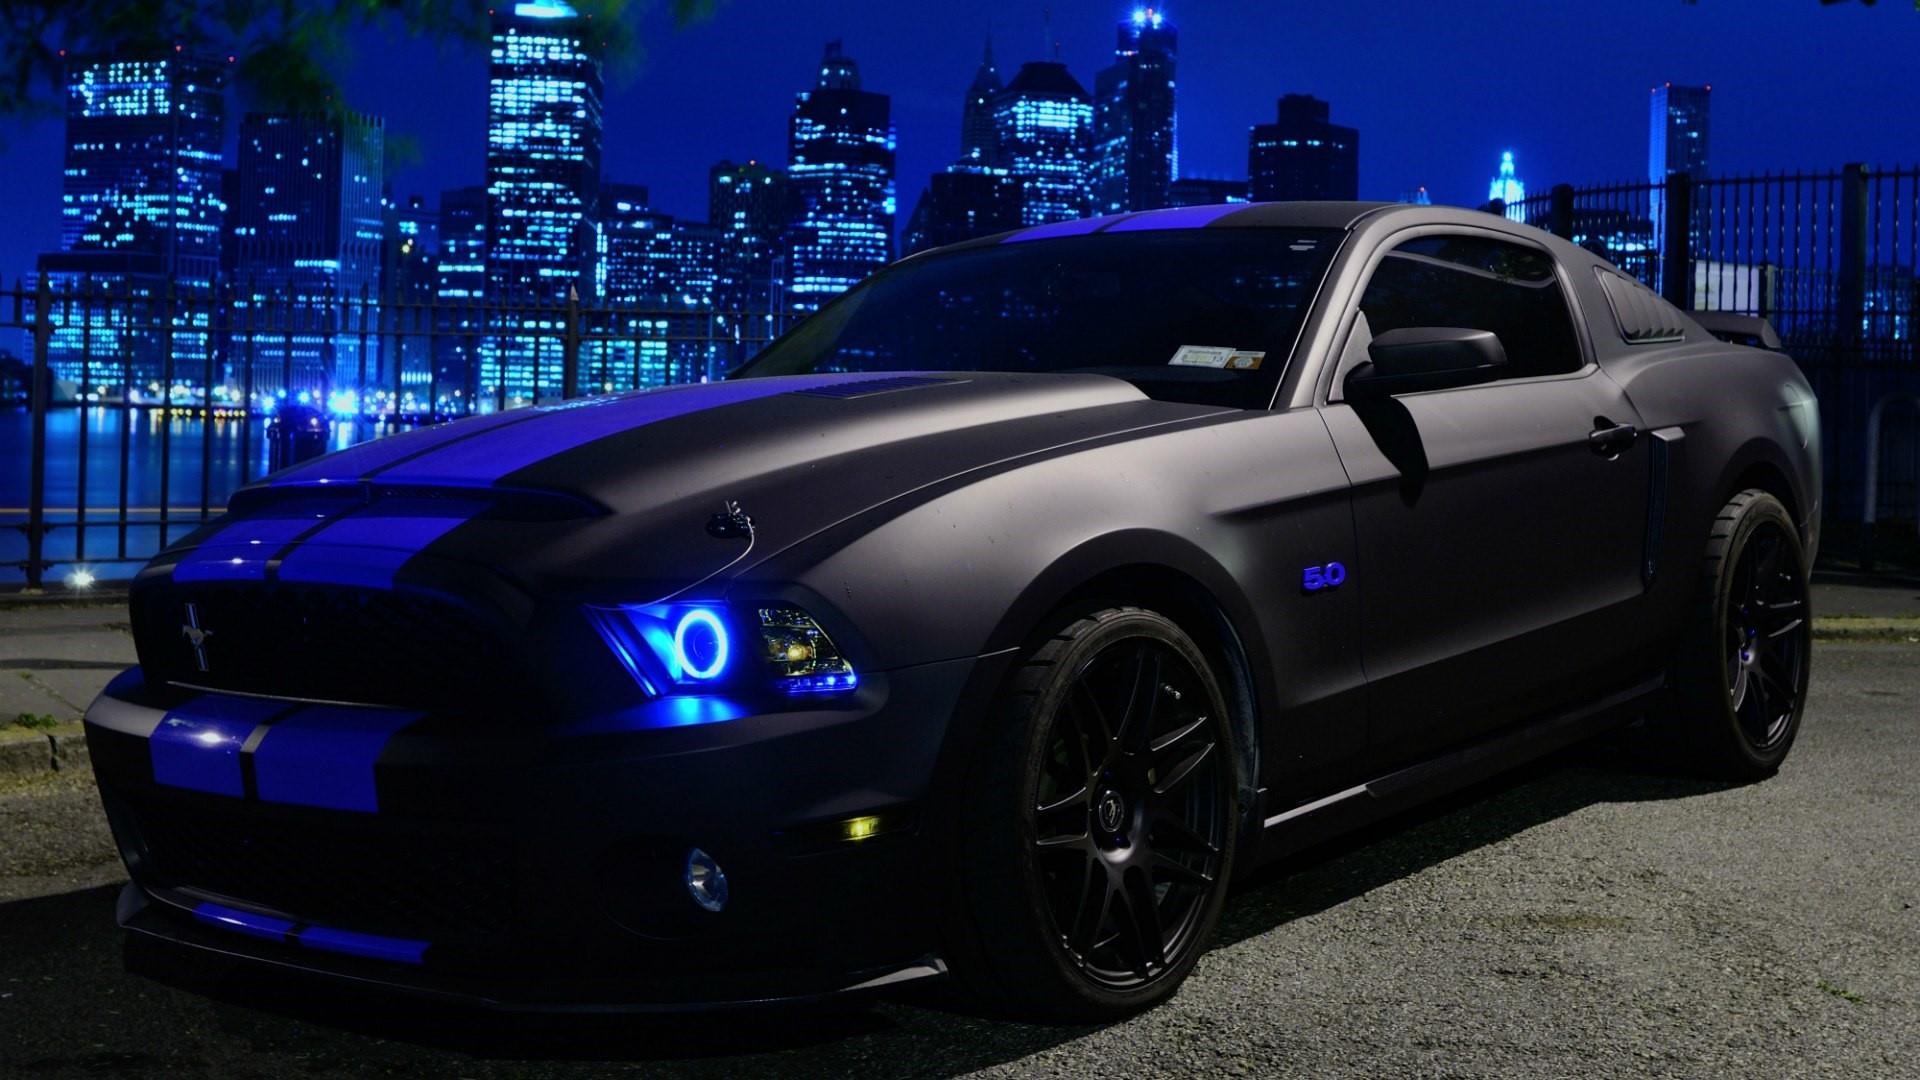 Black Ford Mustang Wallpaper Free Black Ford Mustang Background